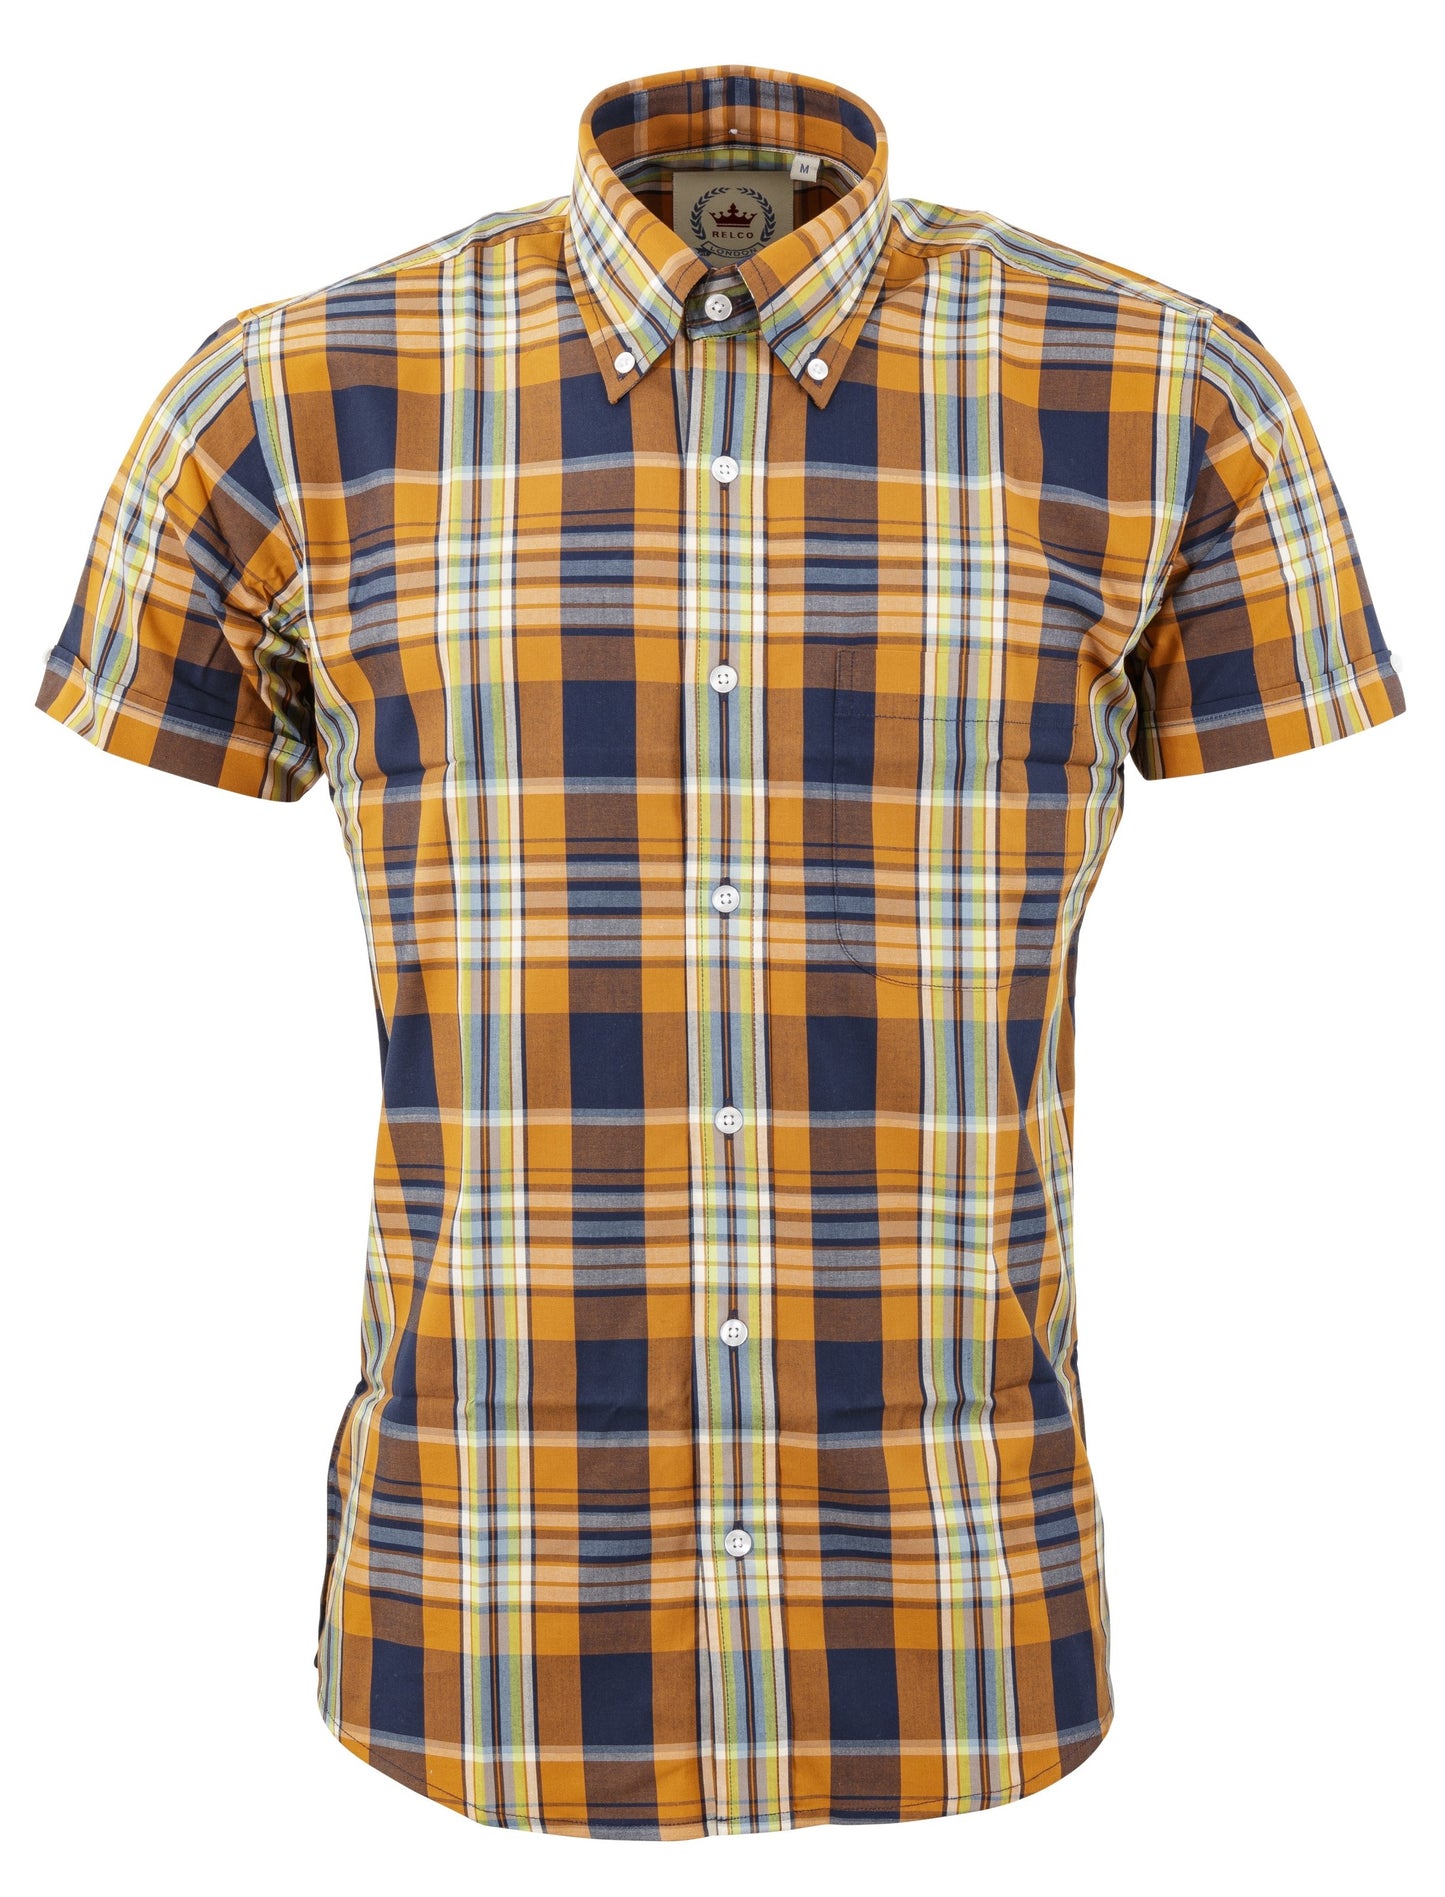 Relco Mens Orange Check Short Sleeved Vintage/Retro Button Down Shirts